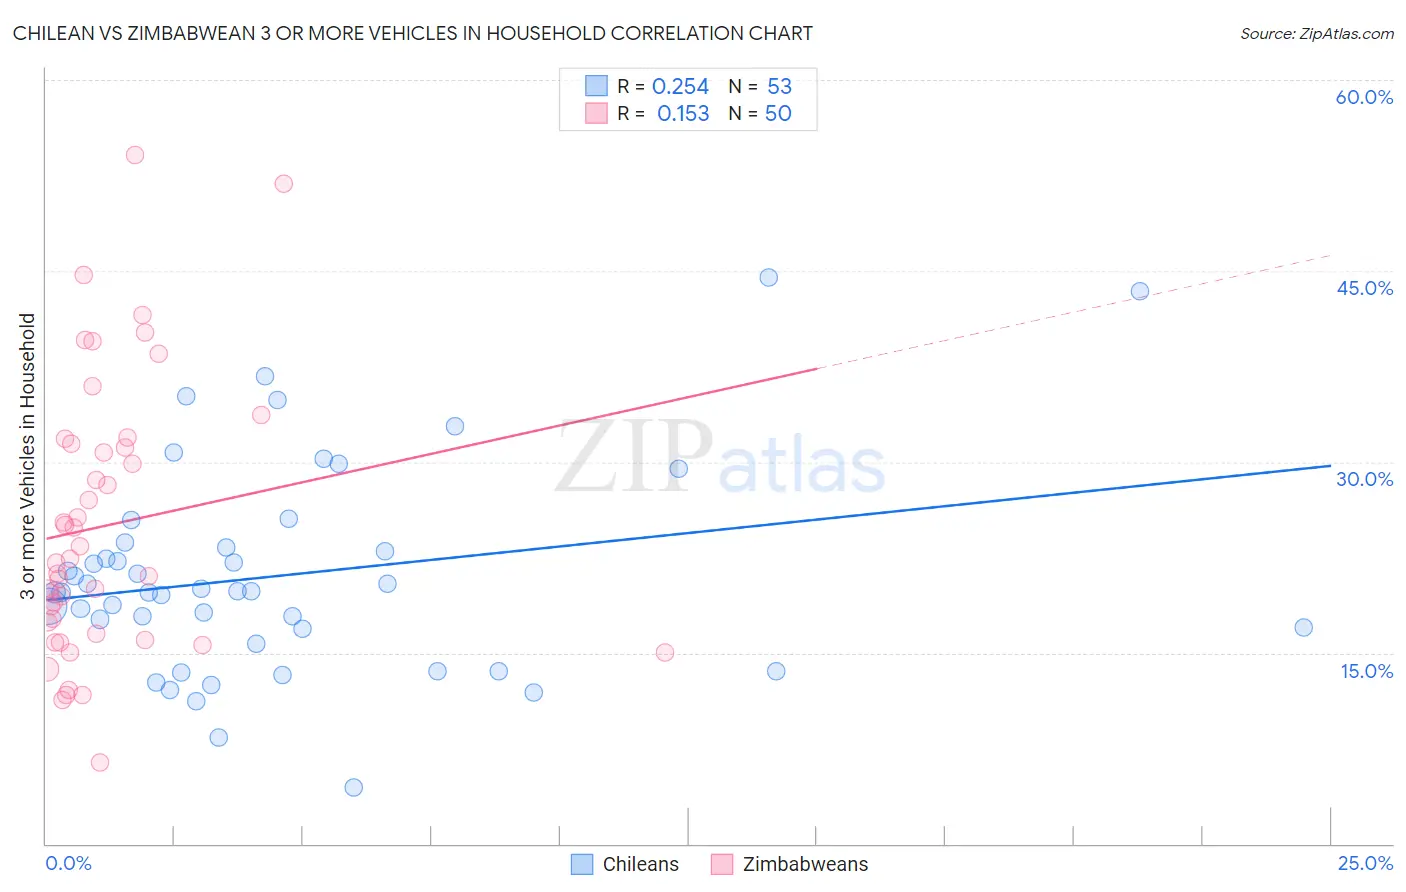 Chilean vs Zimbabwean 3 or more Vehicles in Household